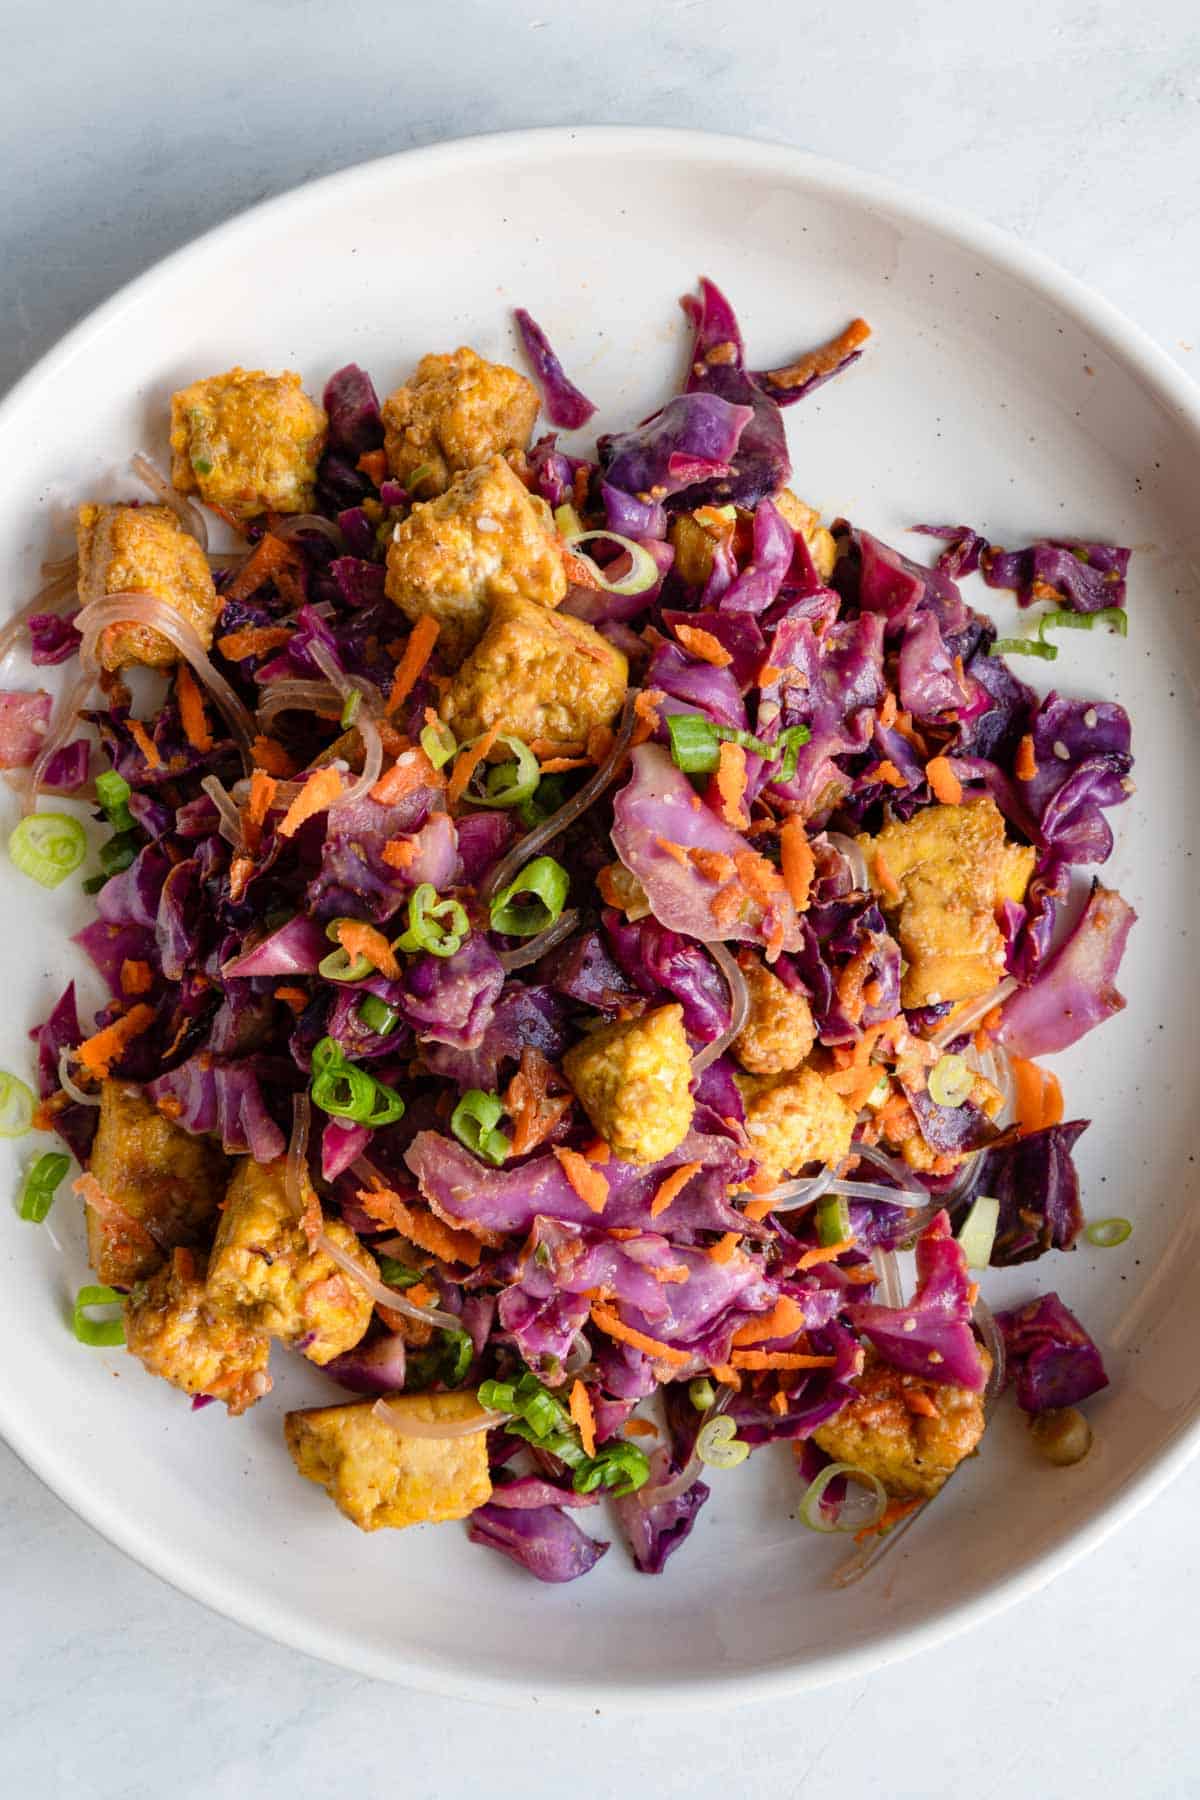 Tofu Salad with roasted tofu and red cabbage, grated carrots, chopped scallions, sesame seeds, glass noodles, and Asian dressing in a white bowl.